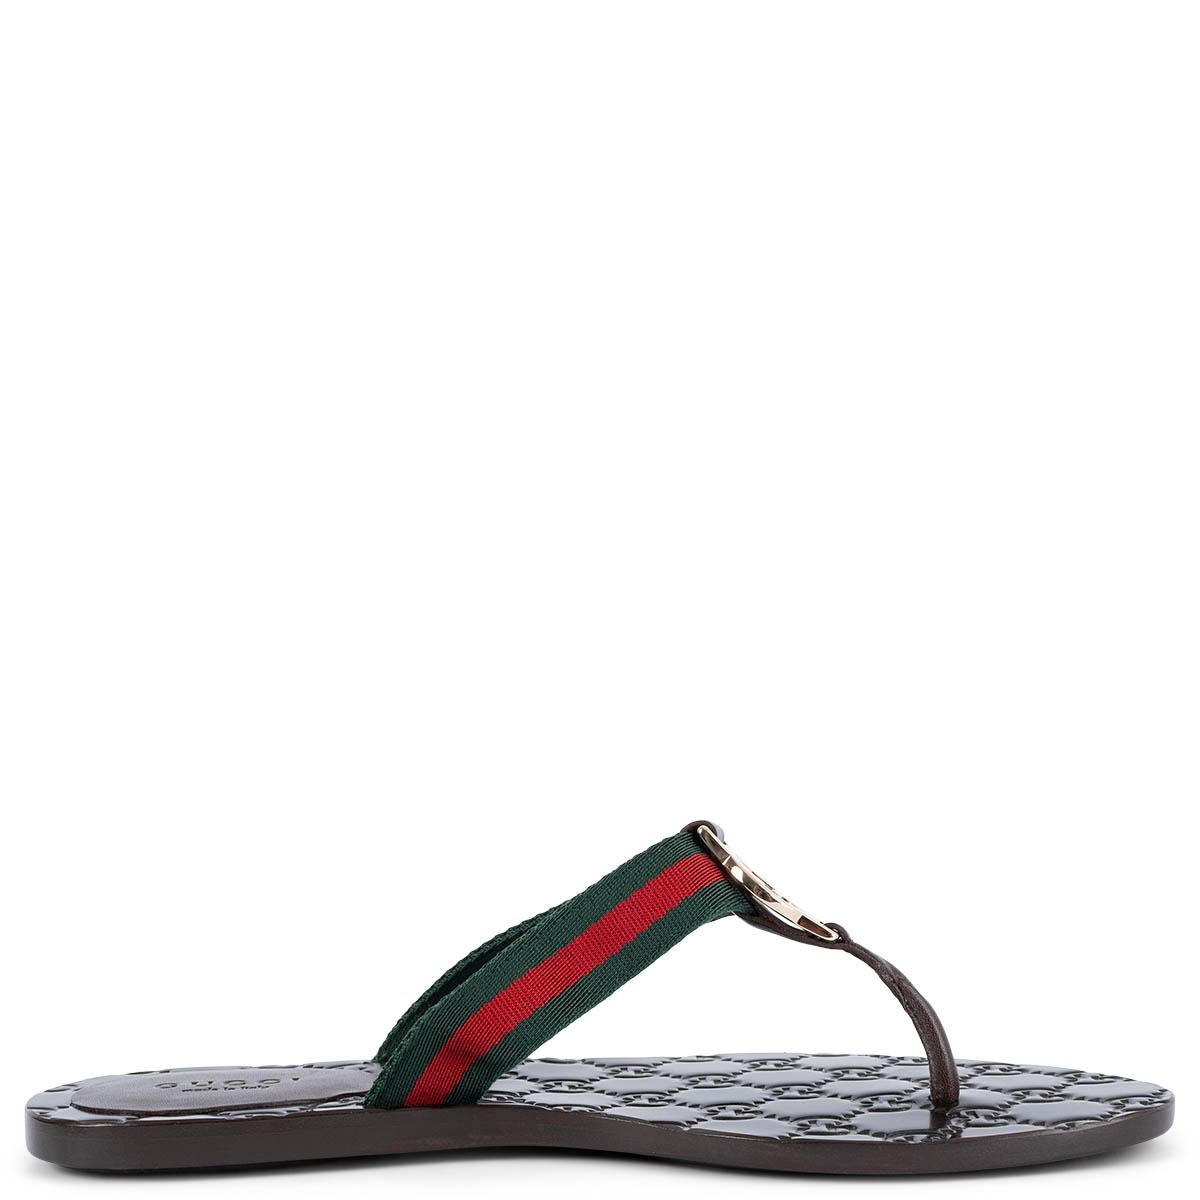 Black GUCCI dark brown GG WEB THONG Sandals Shoes 36 For Sale